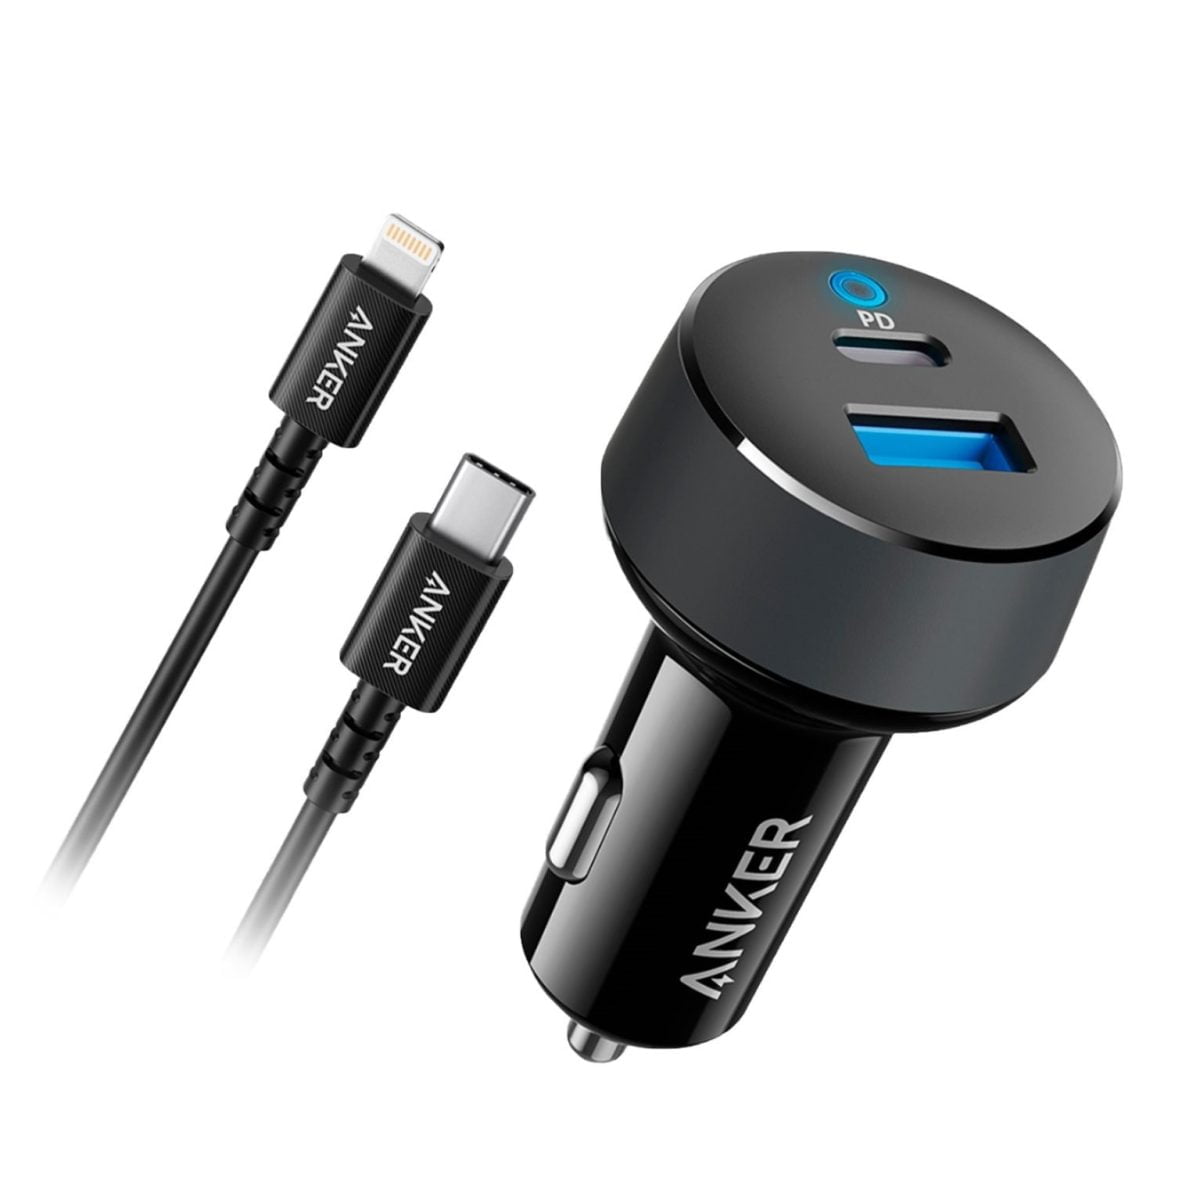 Anker Powerdrive Classic Pd 2